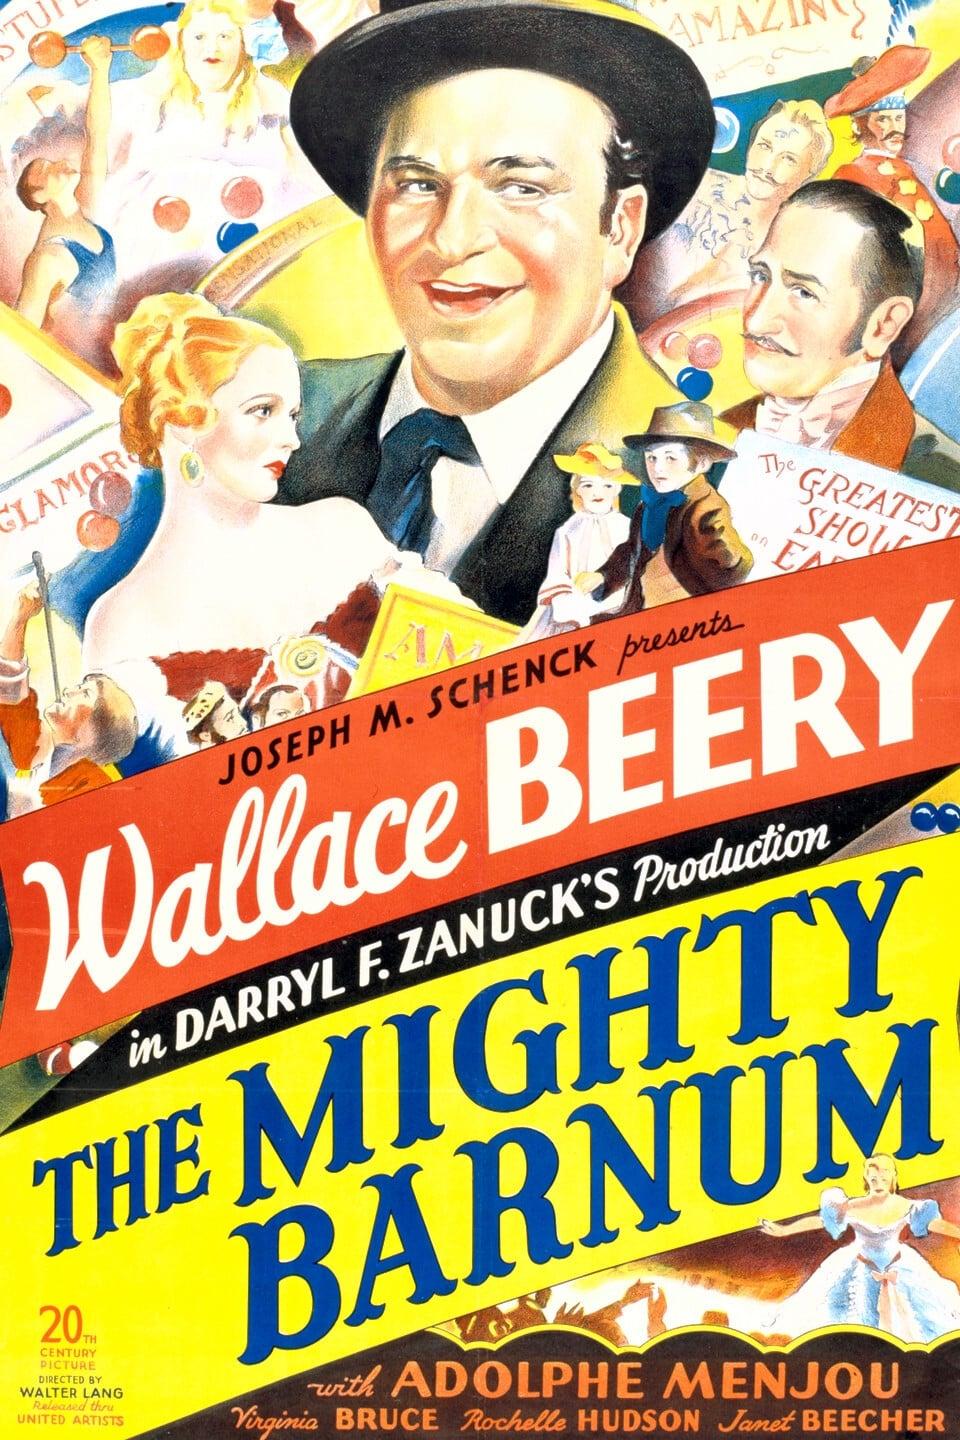 The Mighty Barnum poster